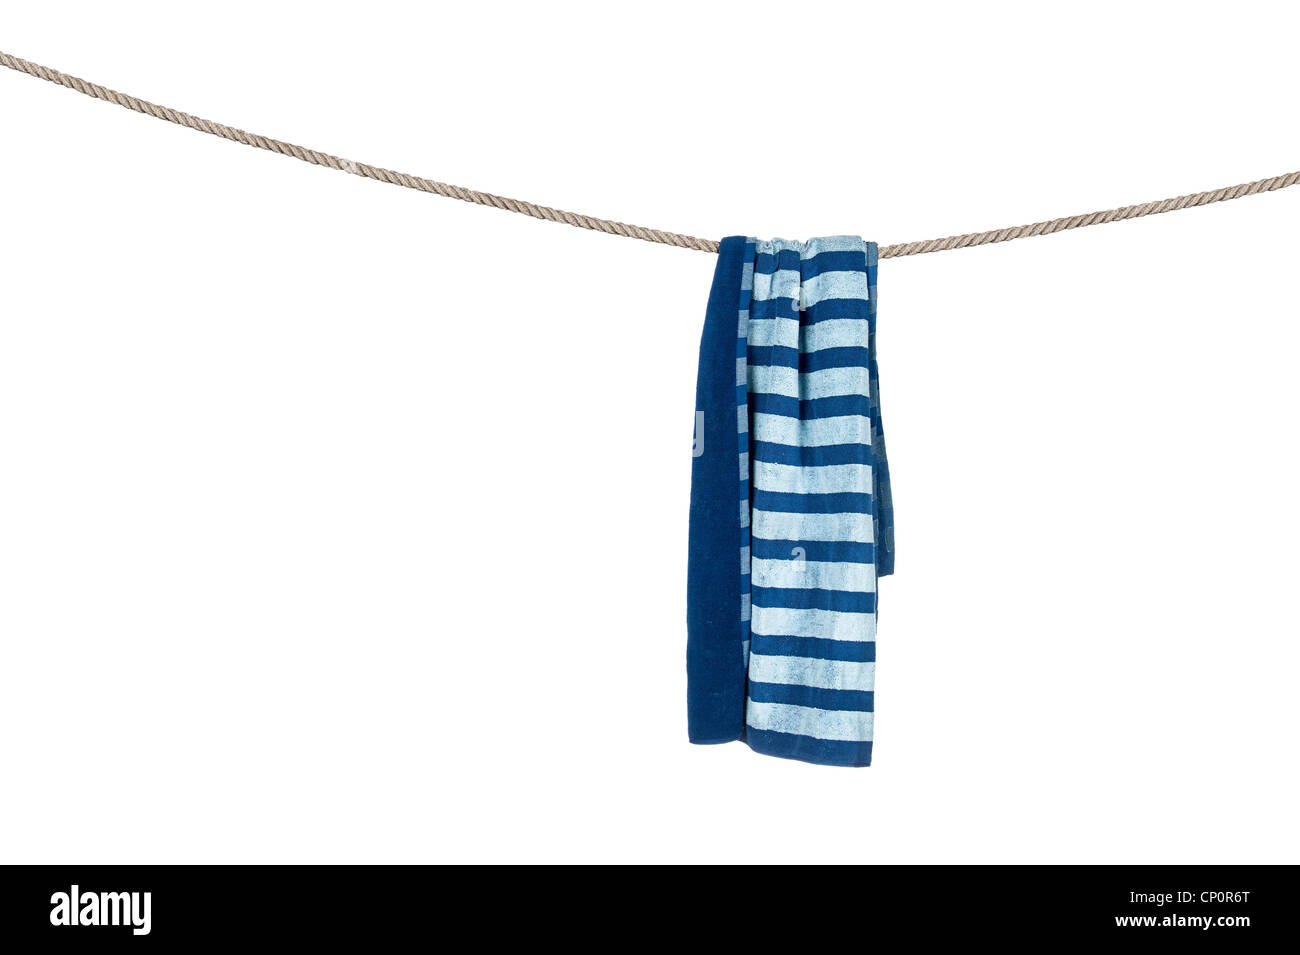 A beach towel hanging on a rope isolated on a white background. Stock Photo